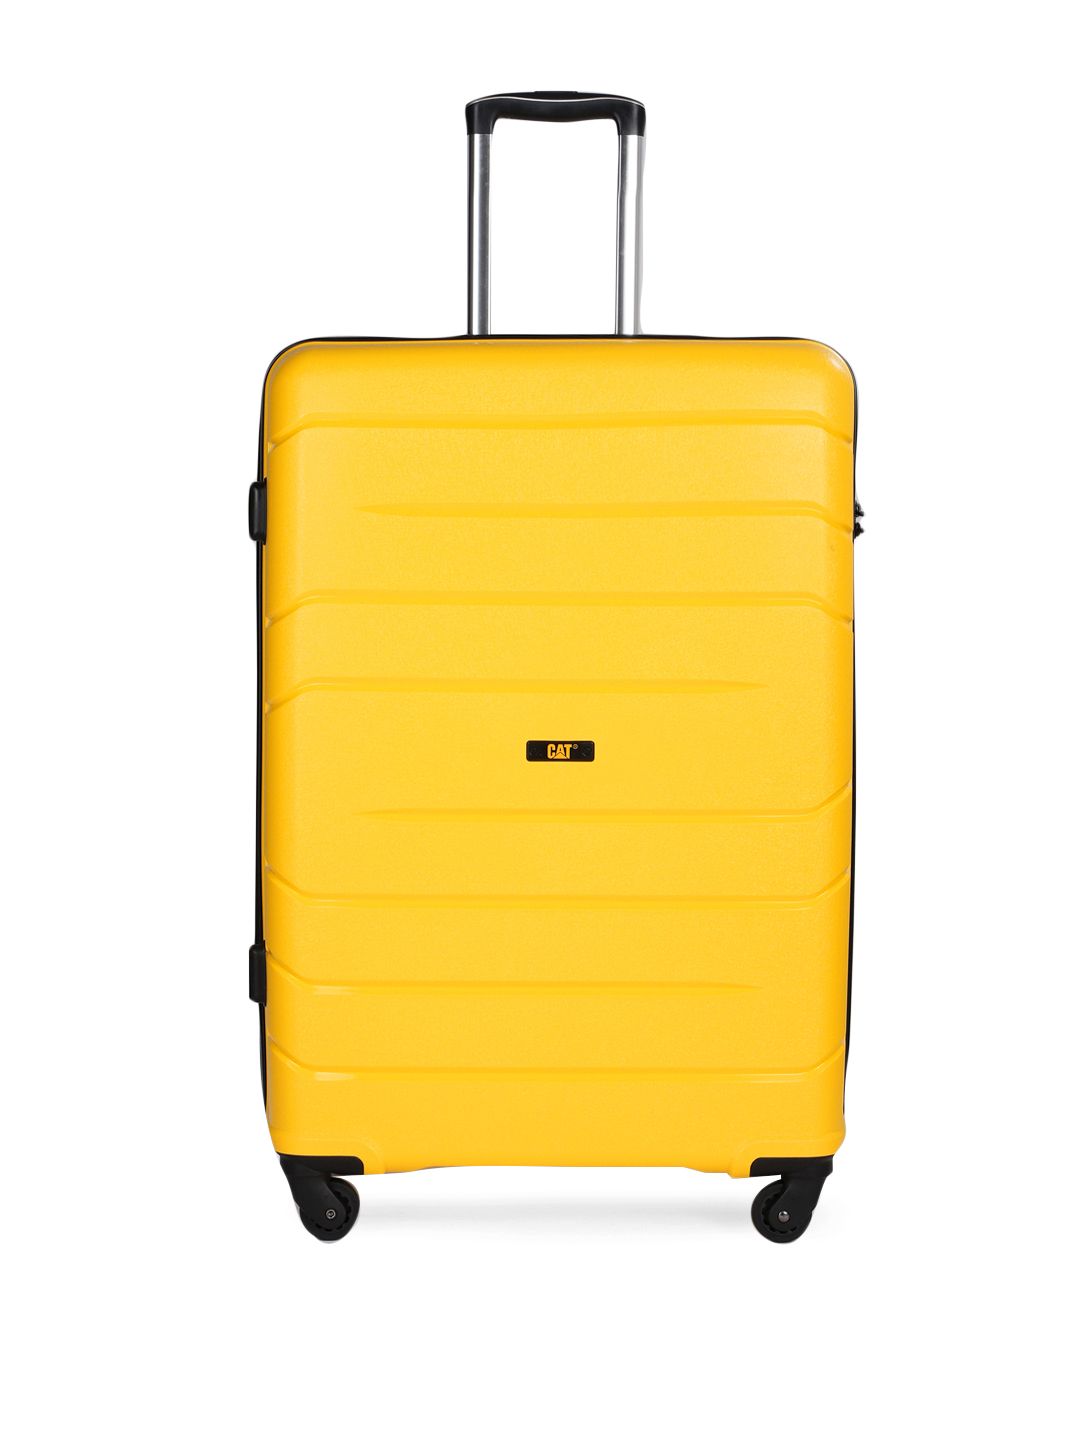 CAT Unisex Yellow Solid 87 L Check-In trolley Price in India